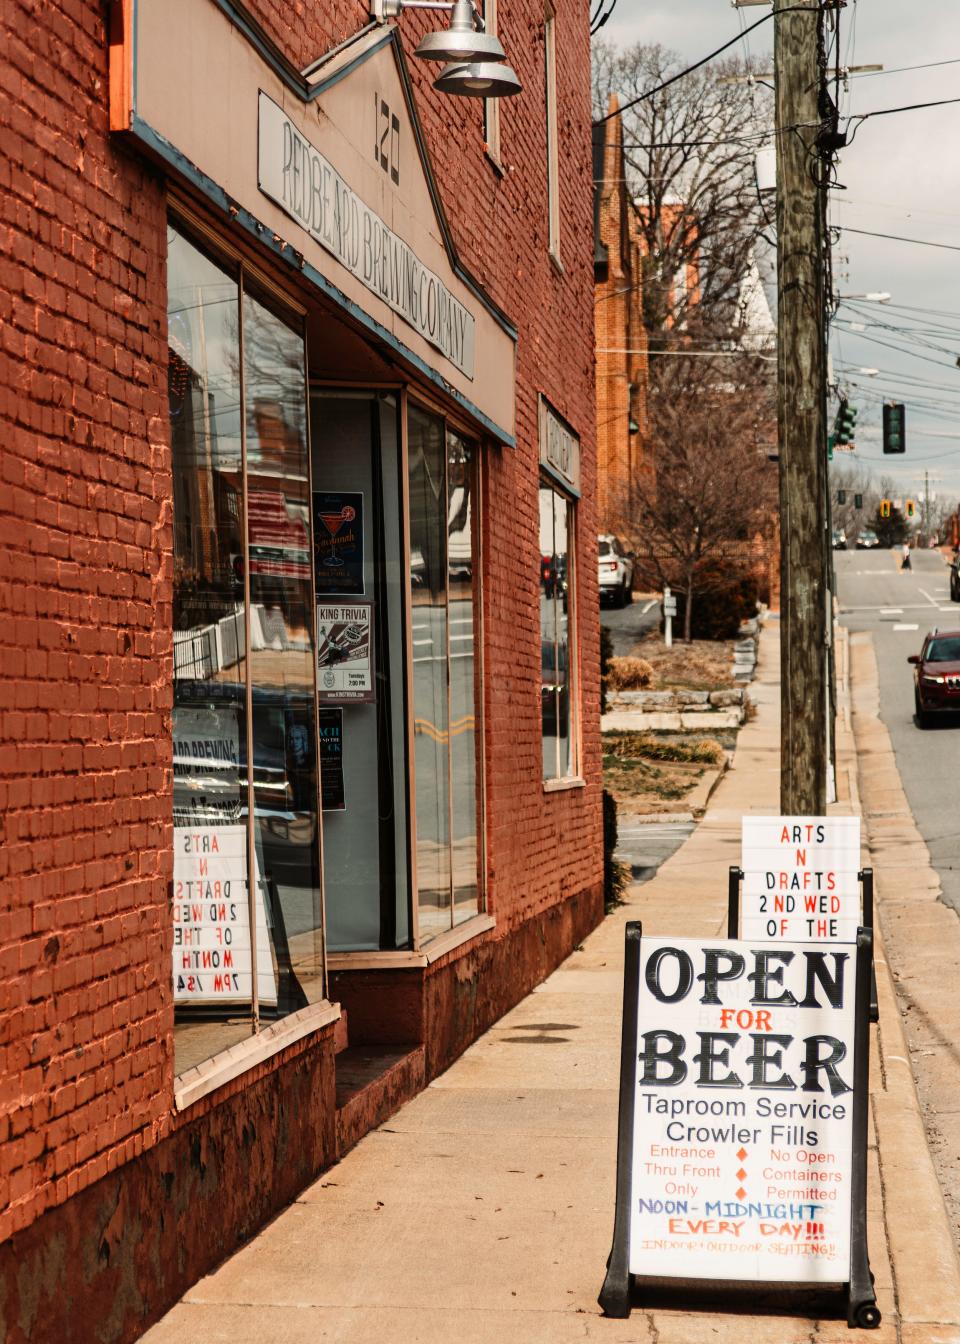 Redbeard Brewing Company is located at 120 S. Lewis St. in Staunton, Va.